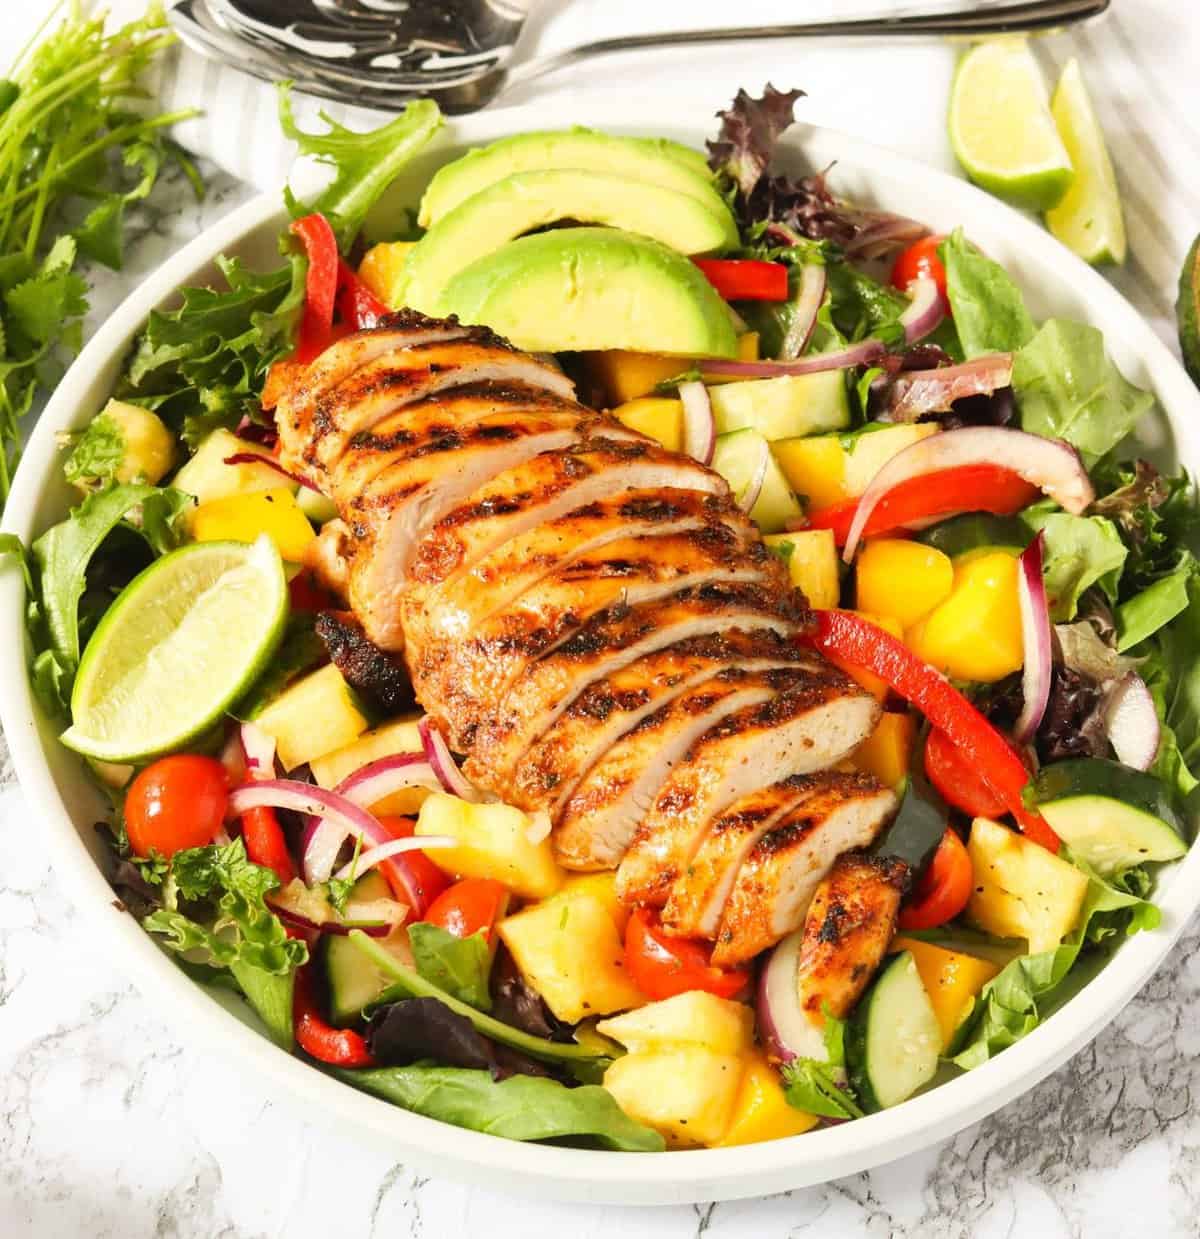 Jerk chicken salad with perfectly spiced grilled chicken